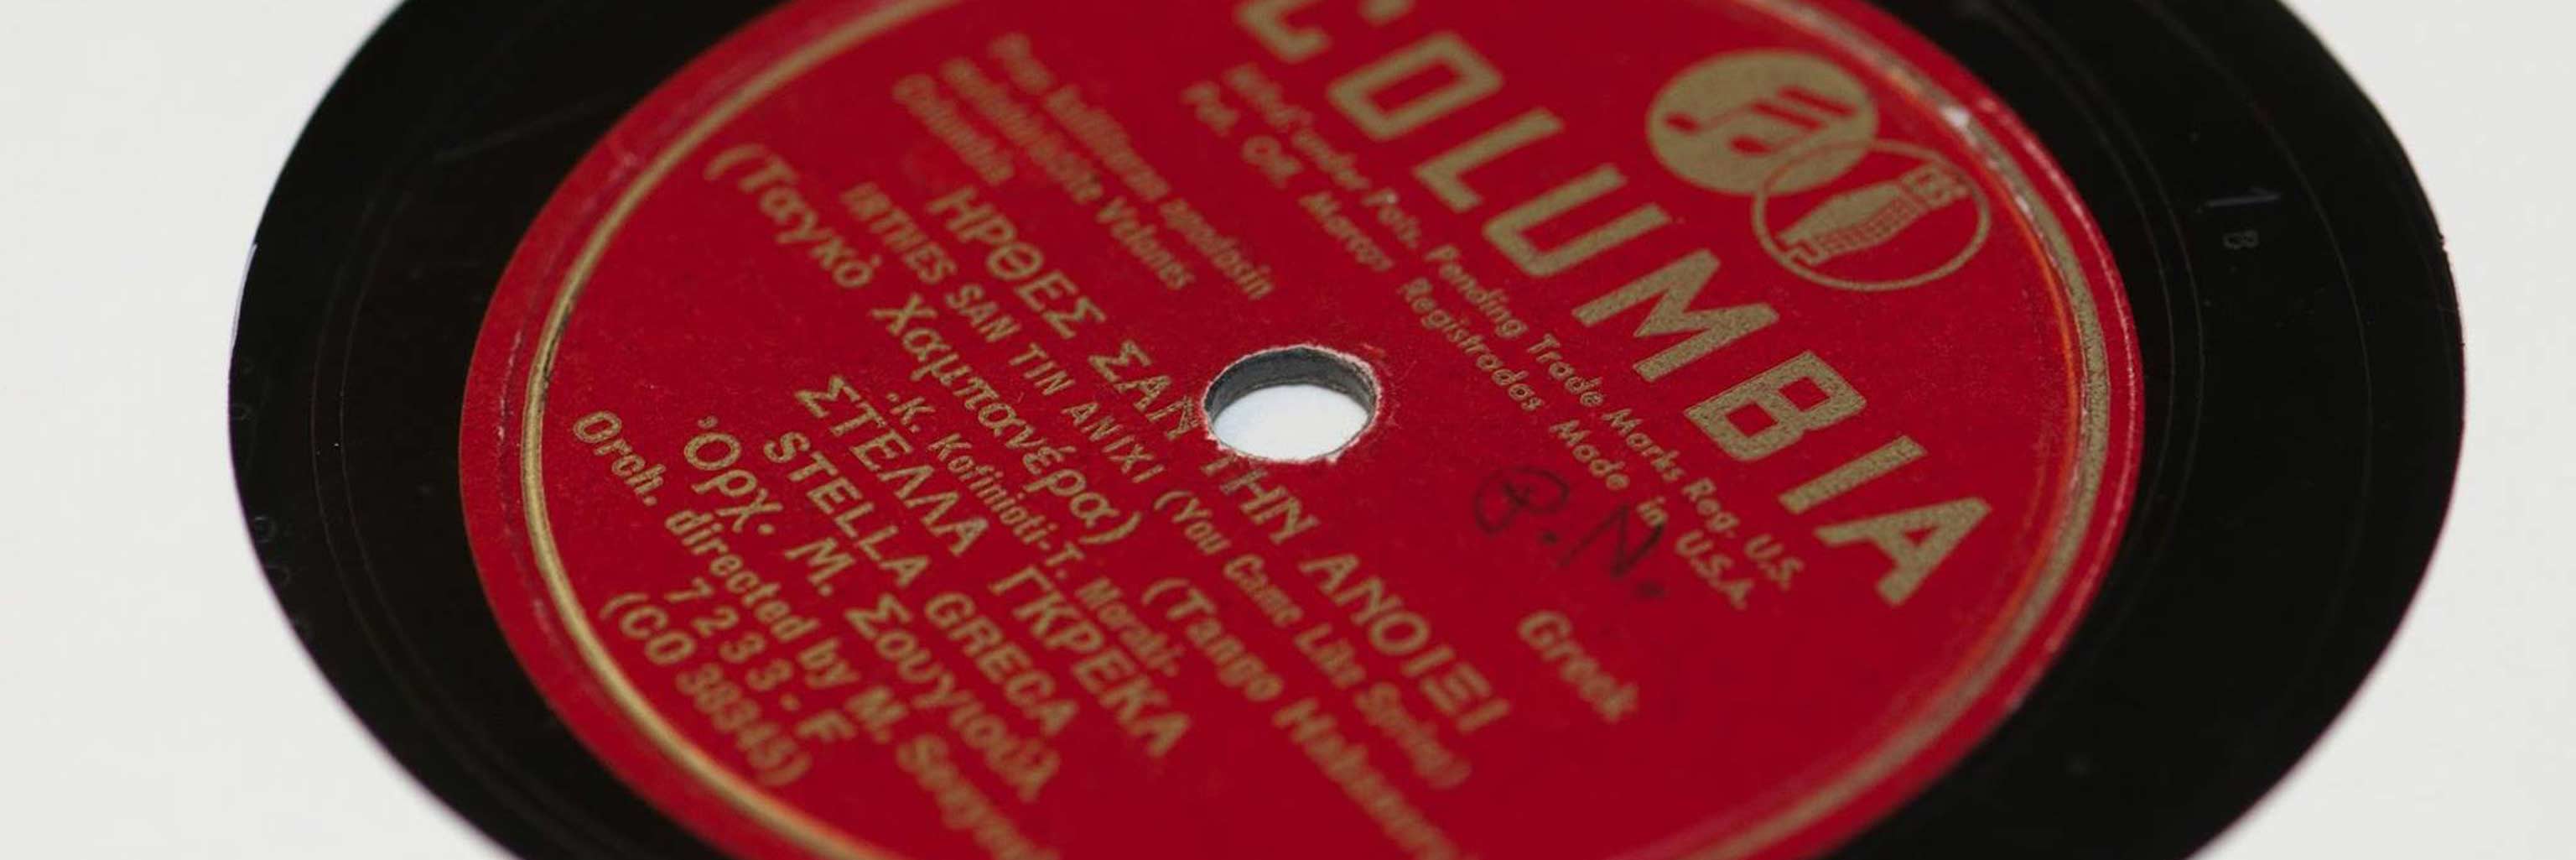 Close-up of a Columbia music record.